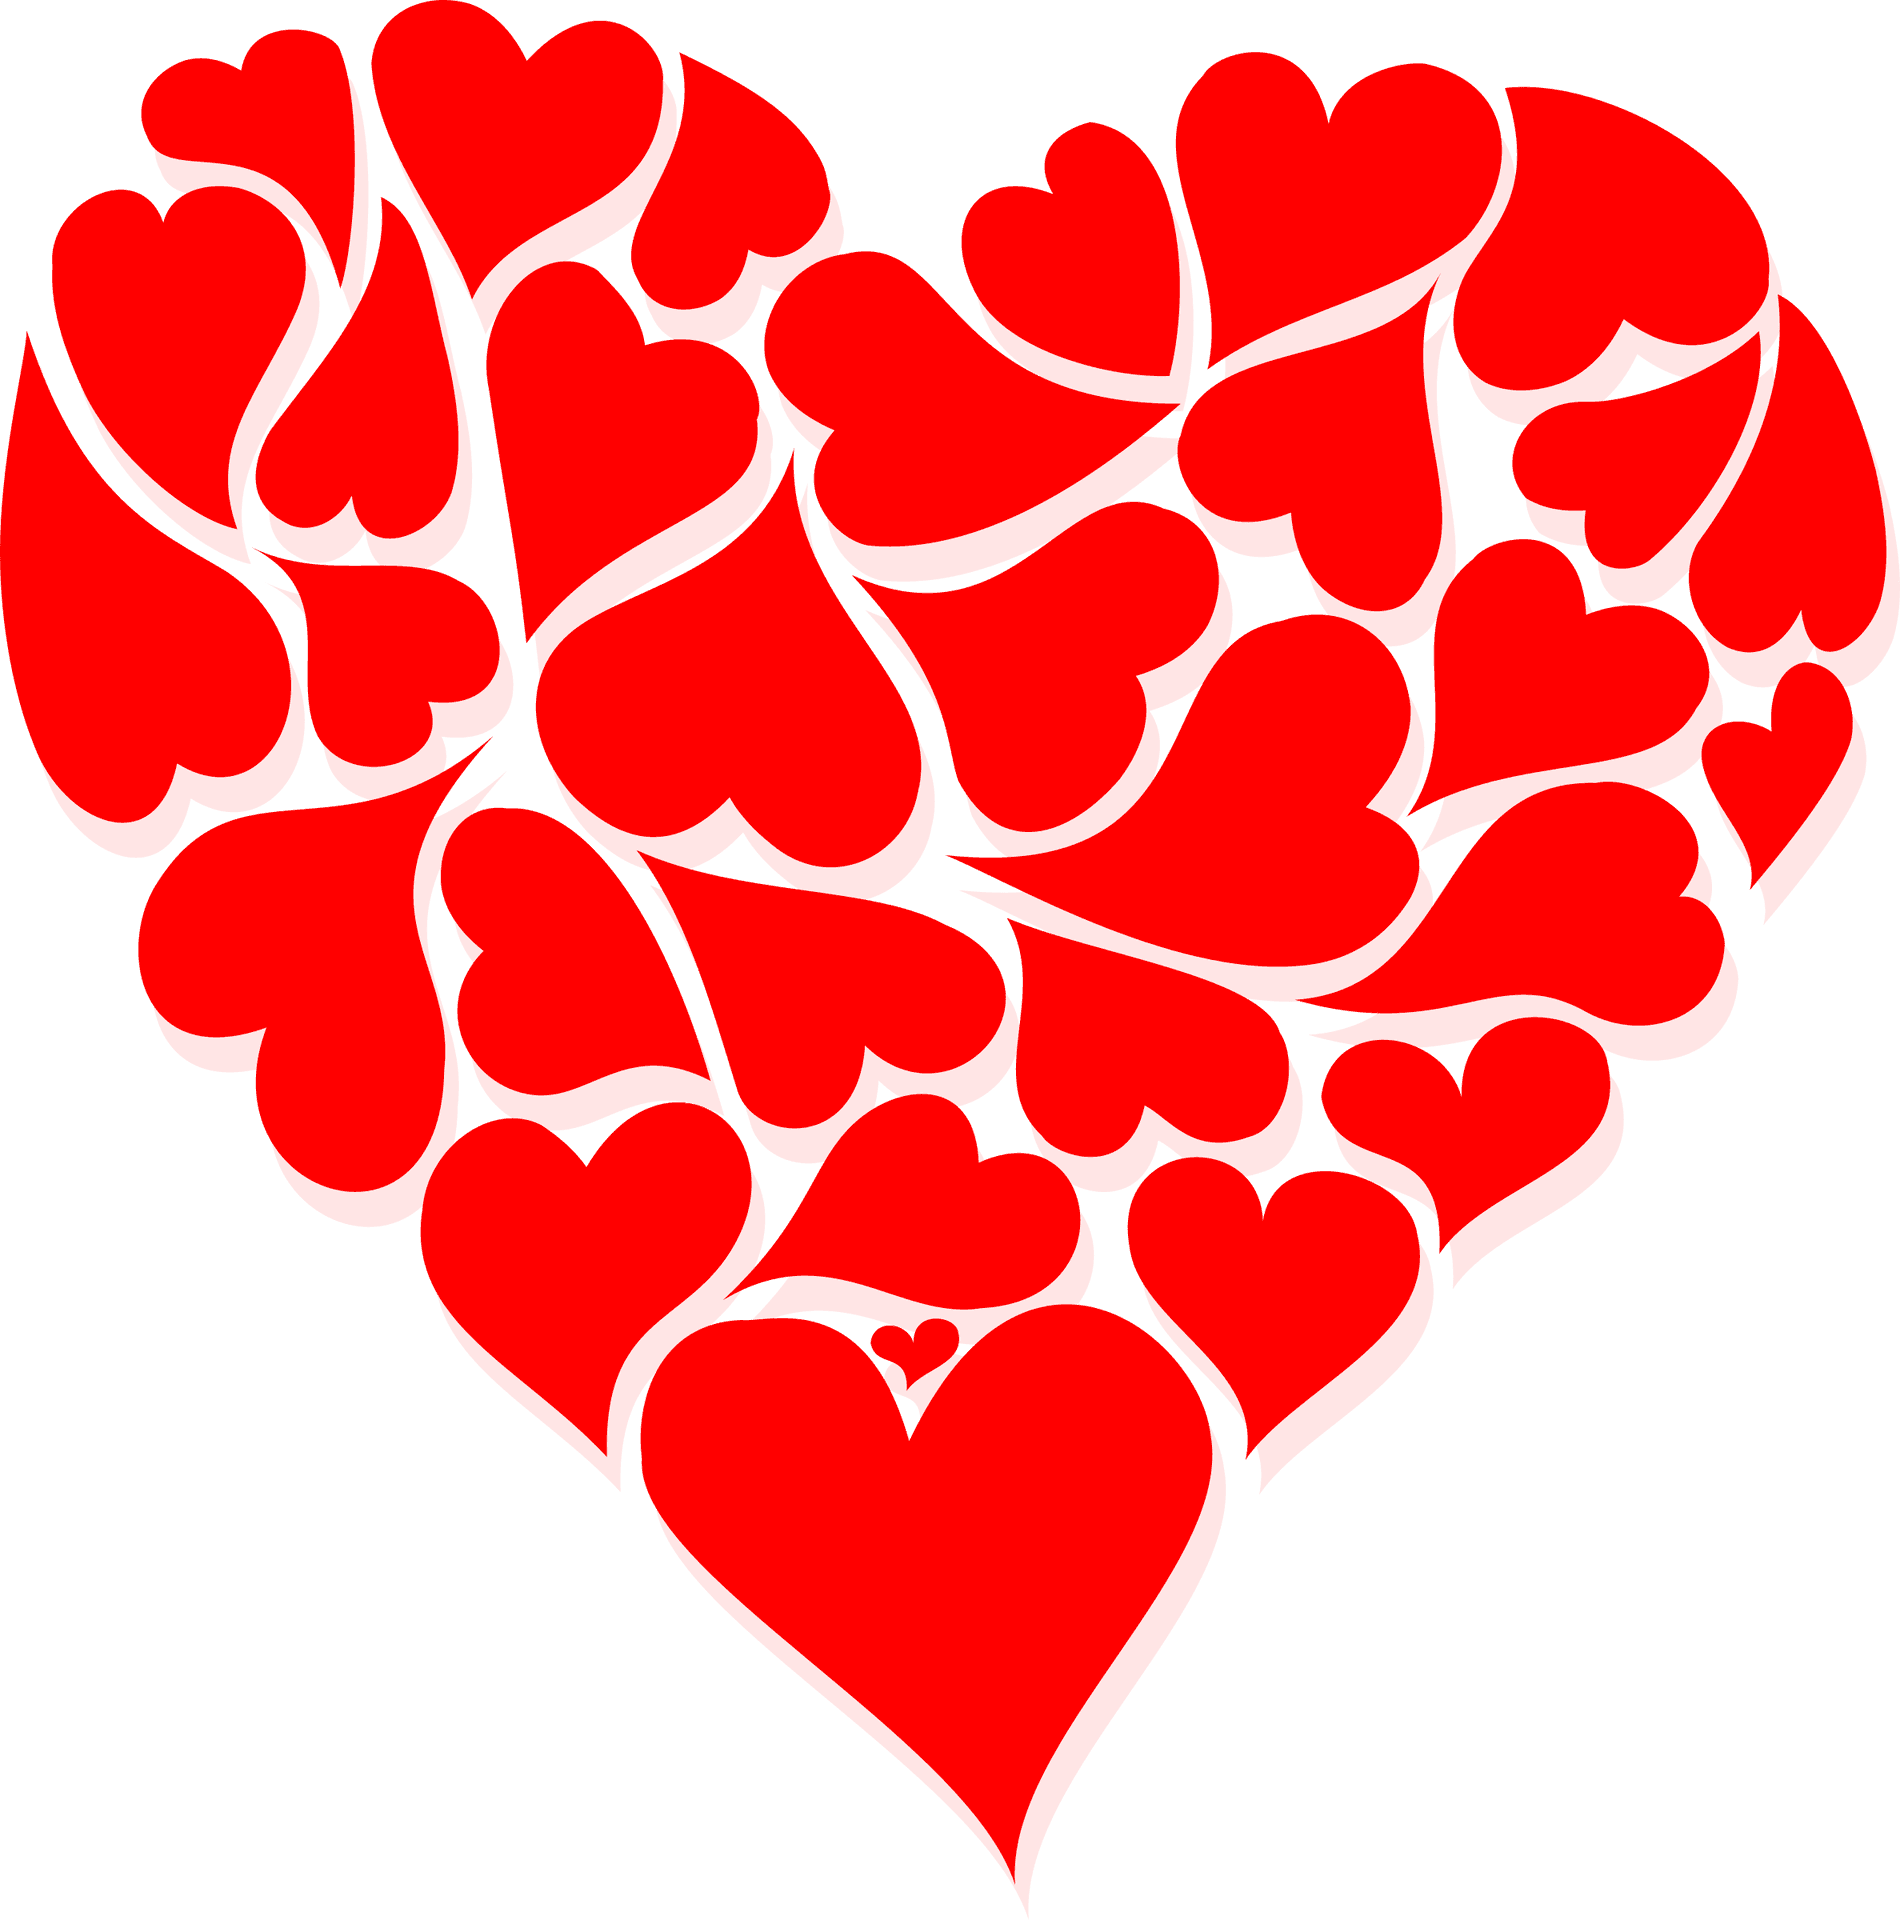 Valentines Heart Collage Graphic PNG image